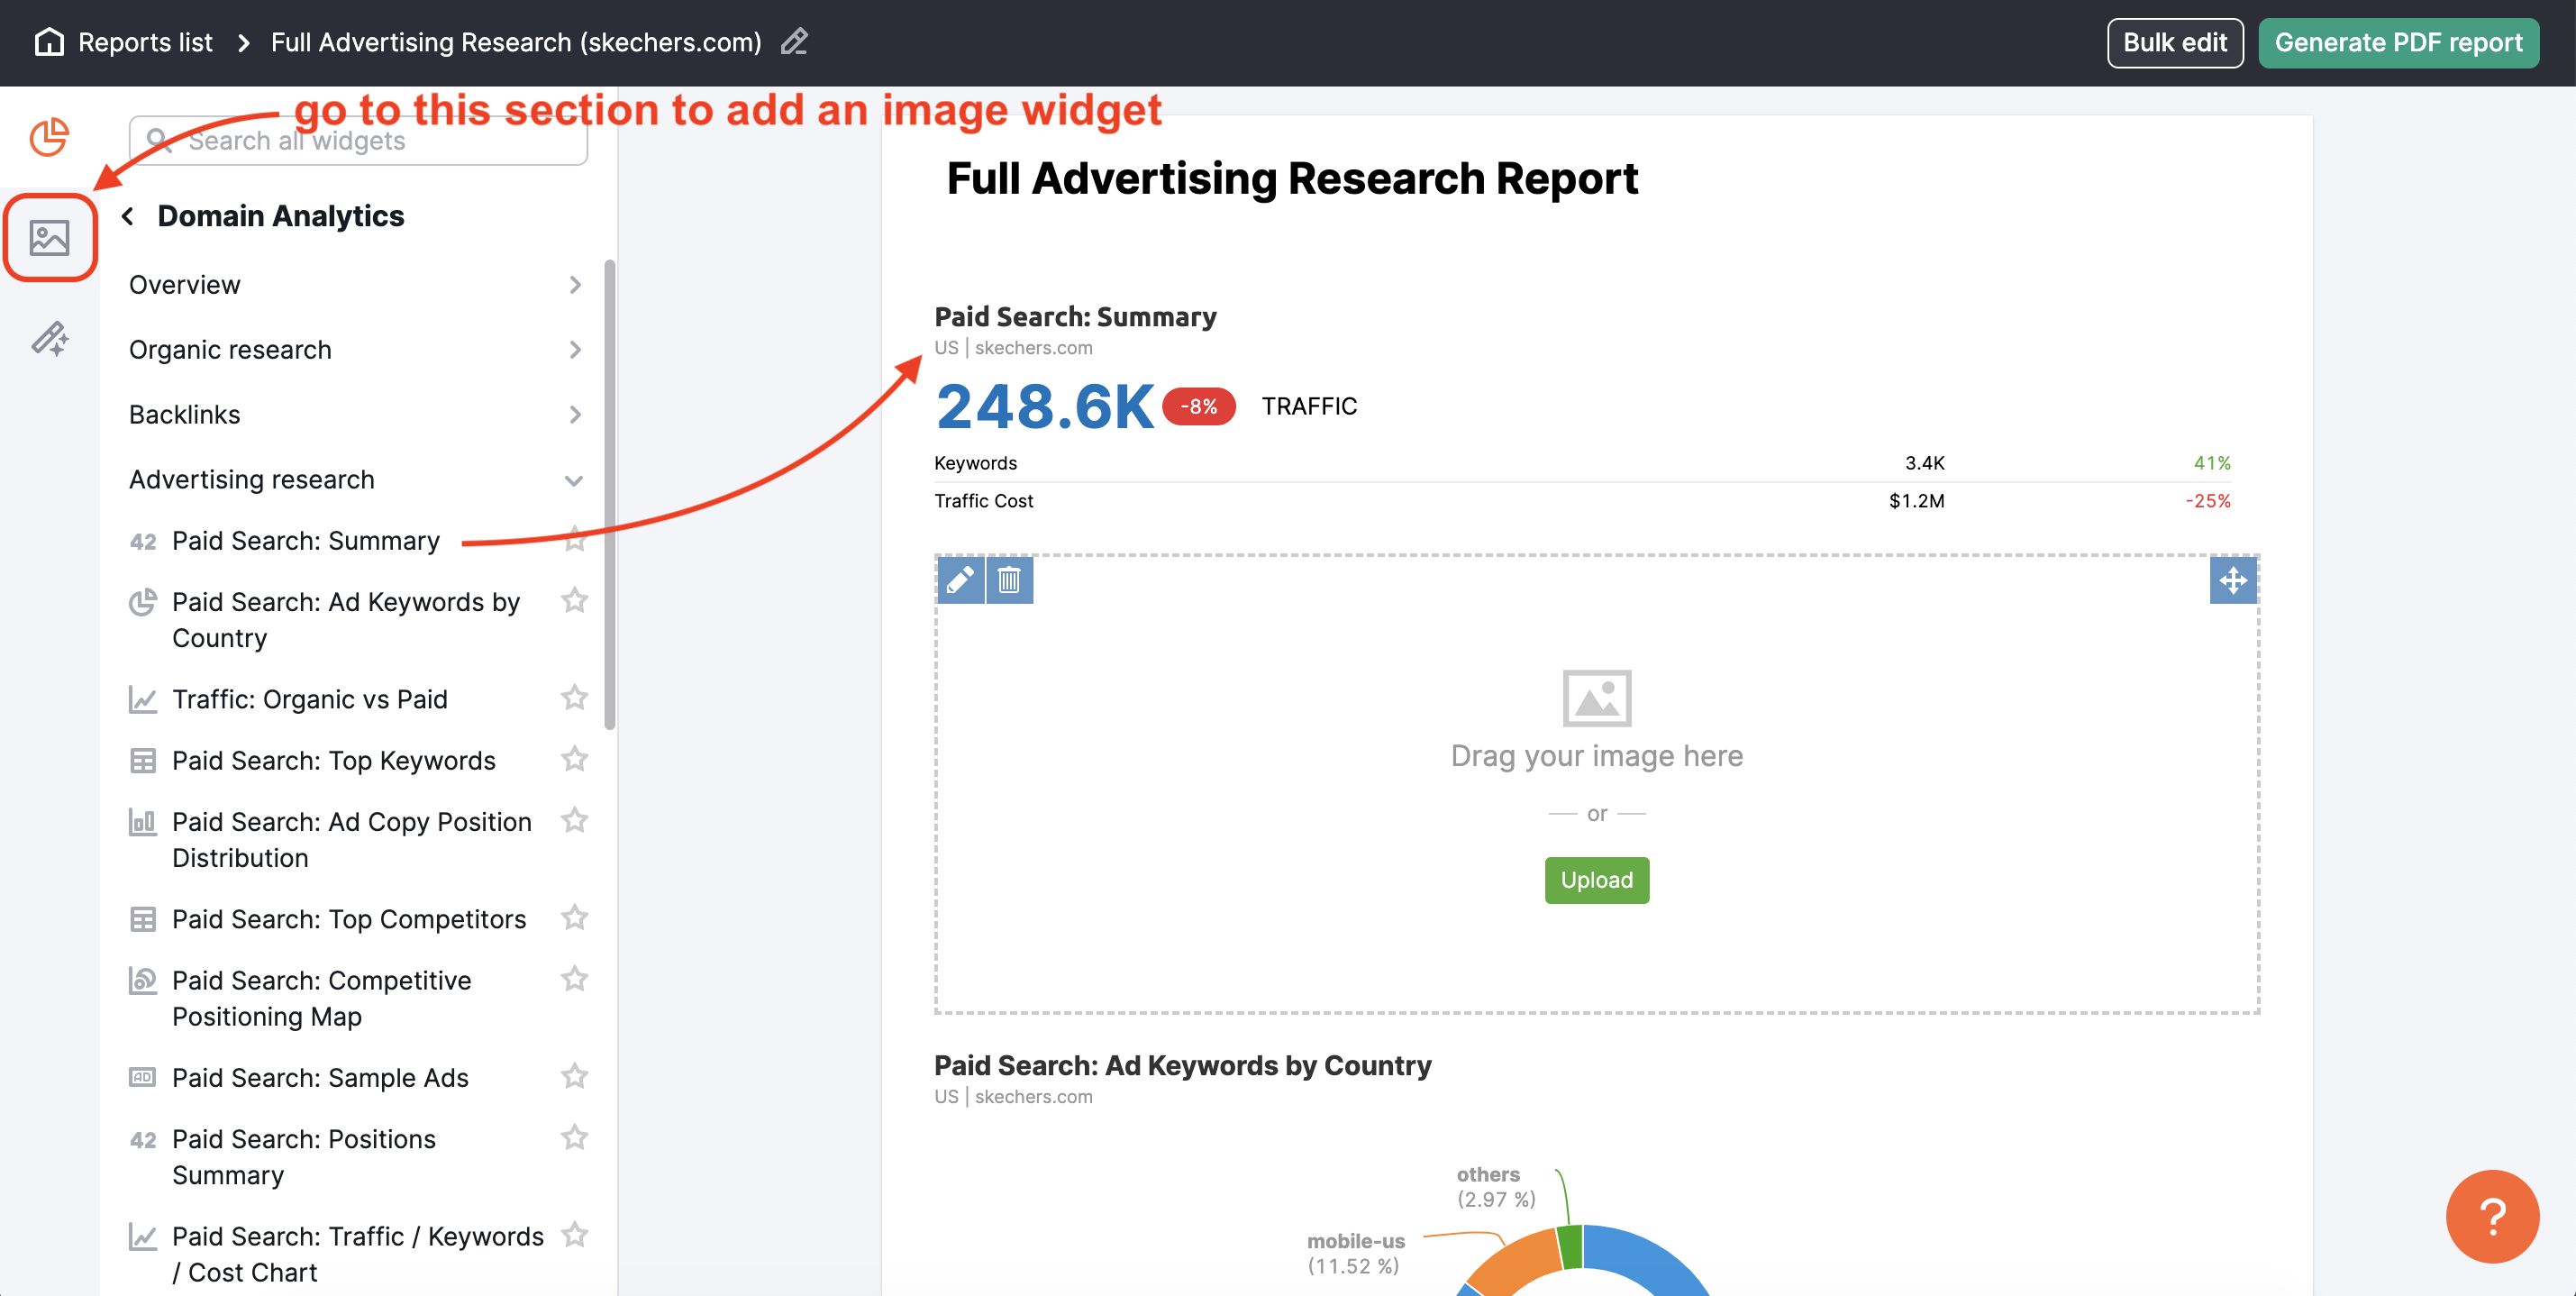 Customizing an Advertising Research PDF report